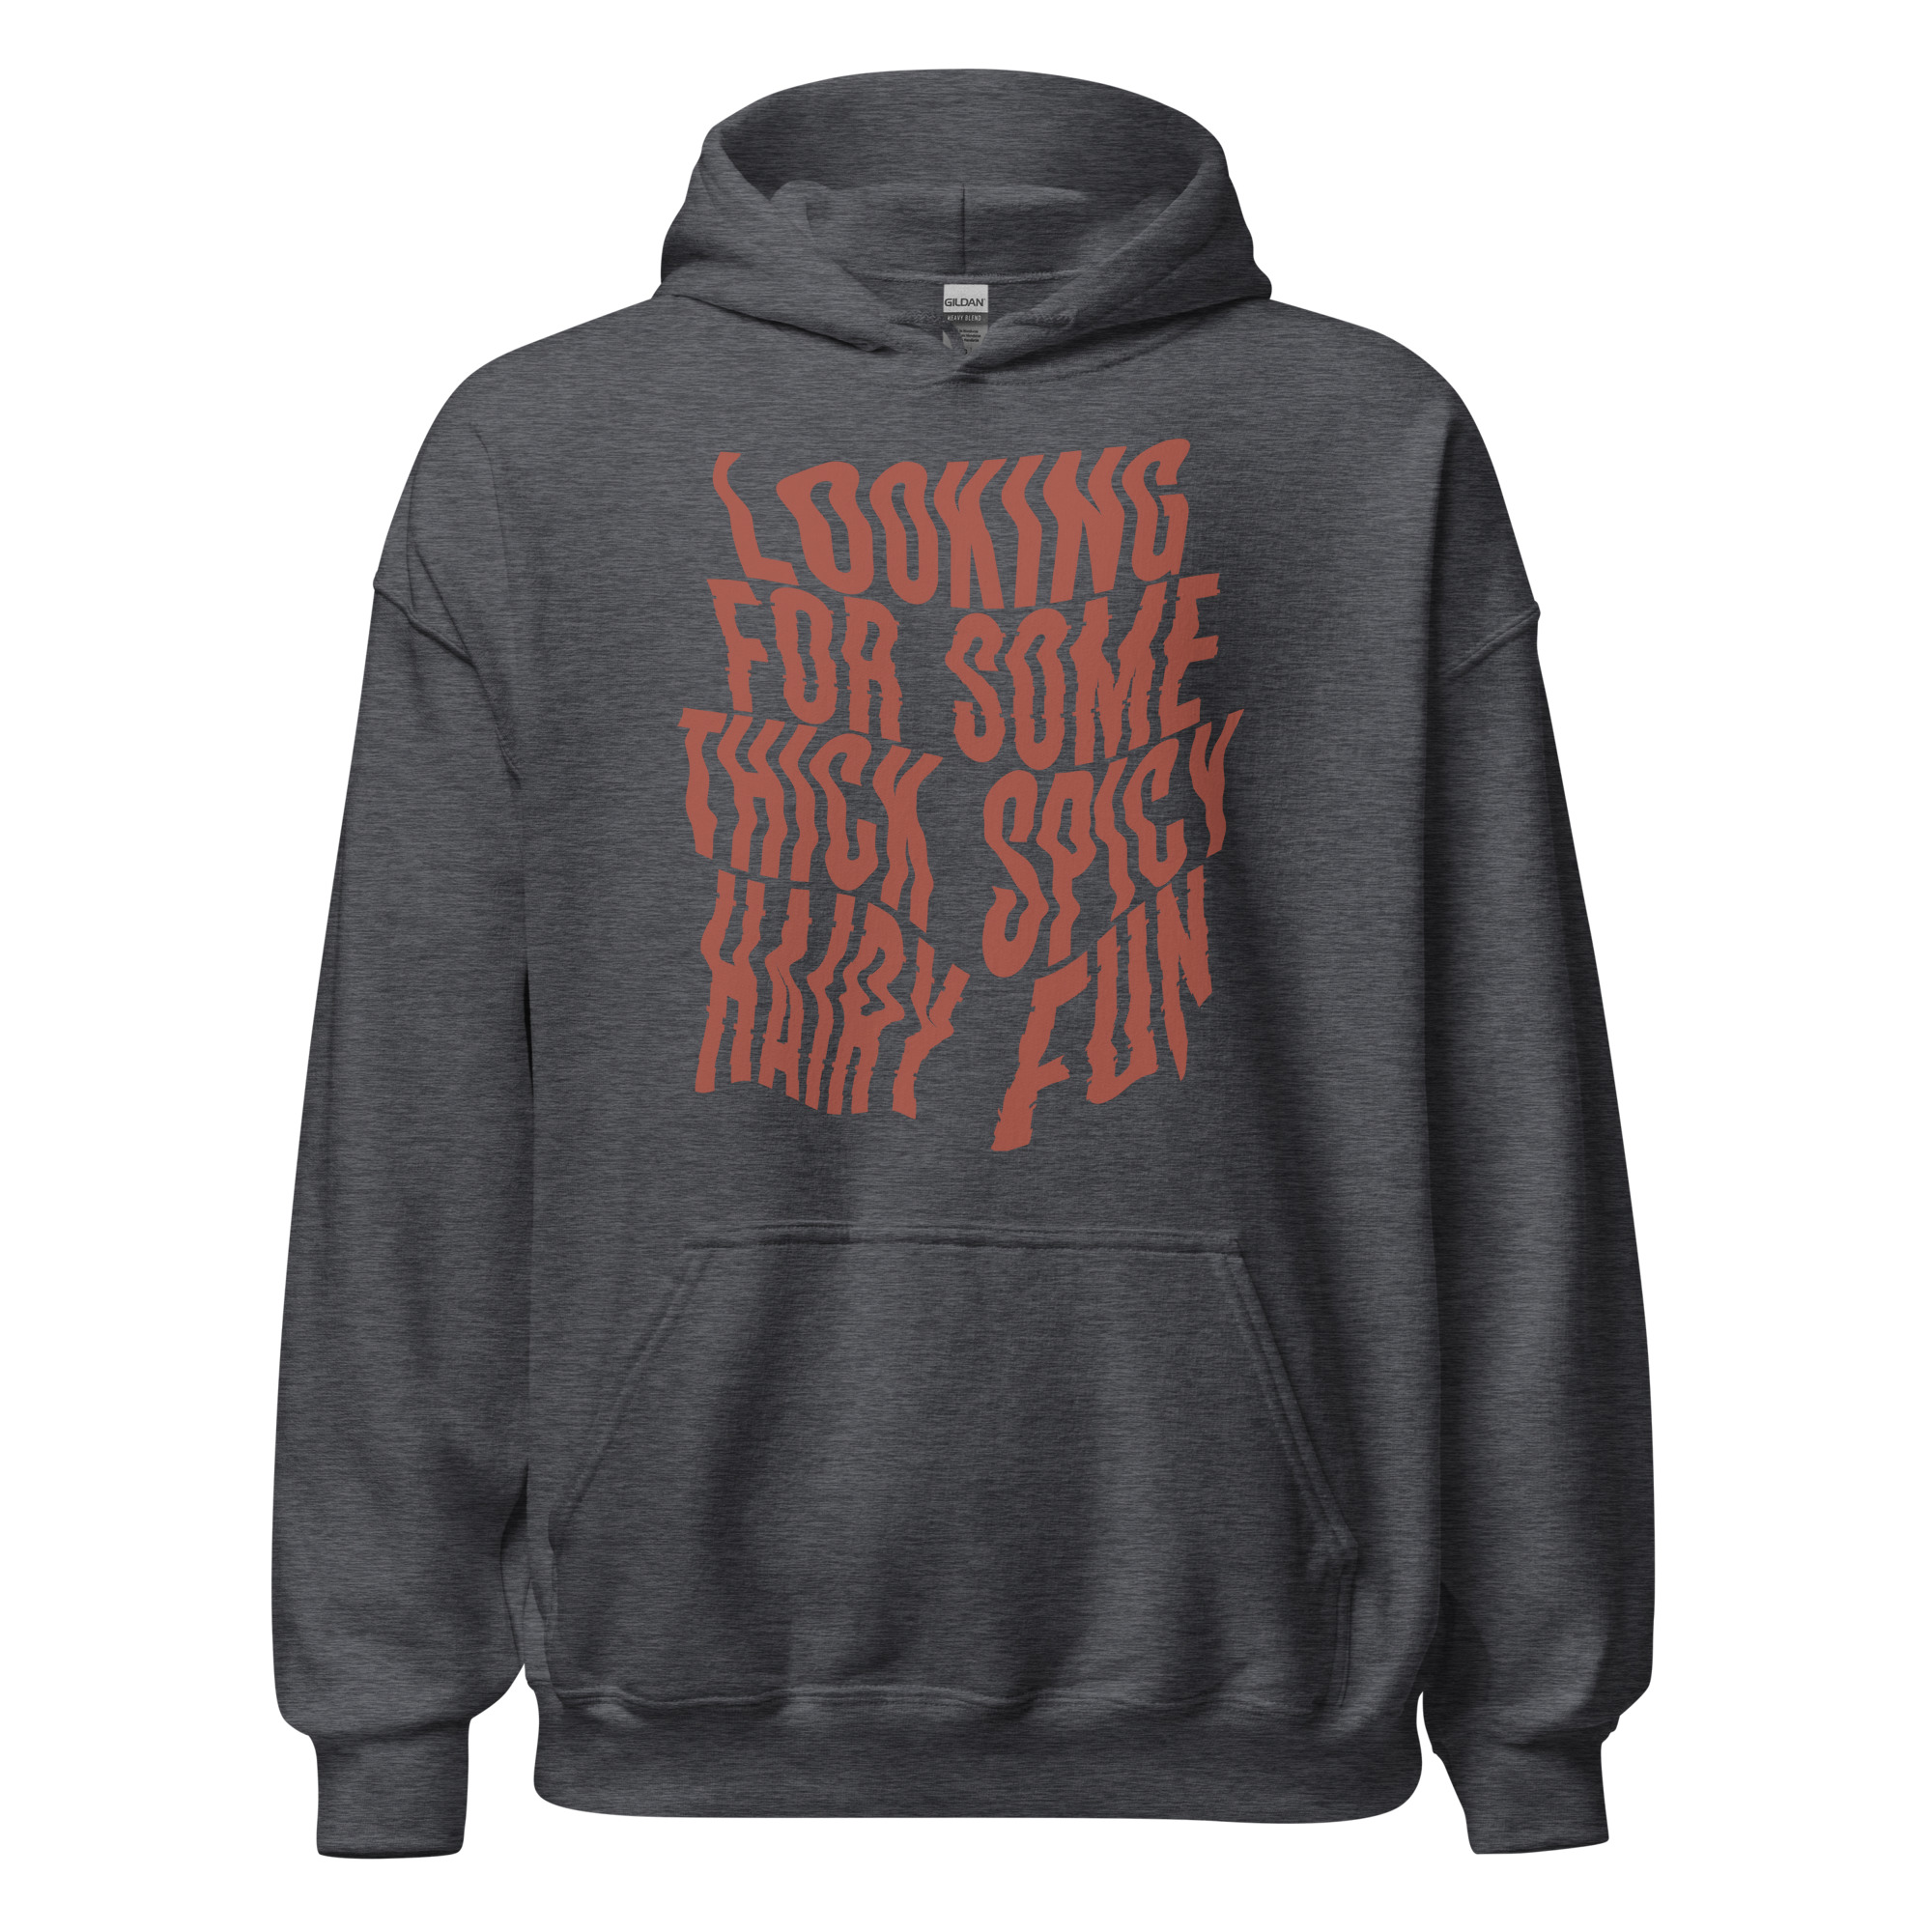 Featured image for “Looking for some Thick Spicy Hairy Fun - Unisex Gildan Hoodie”